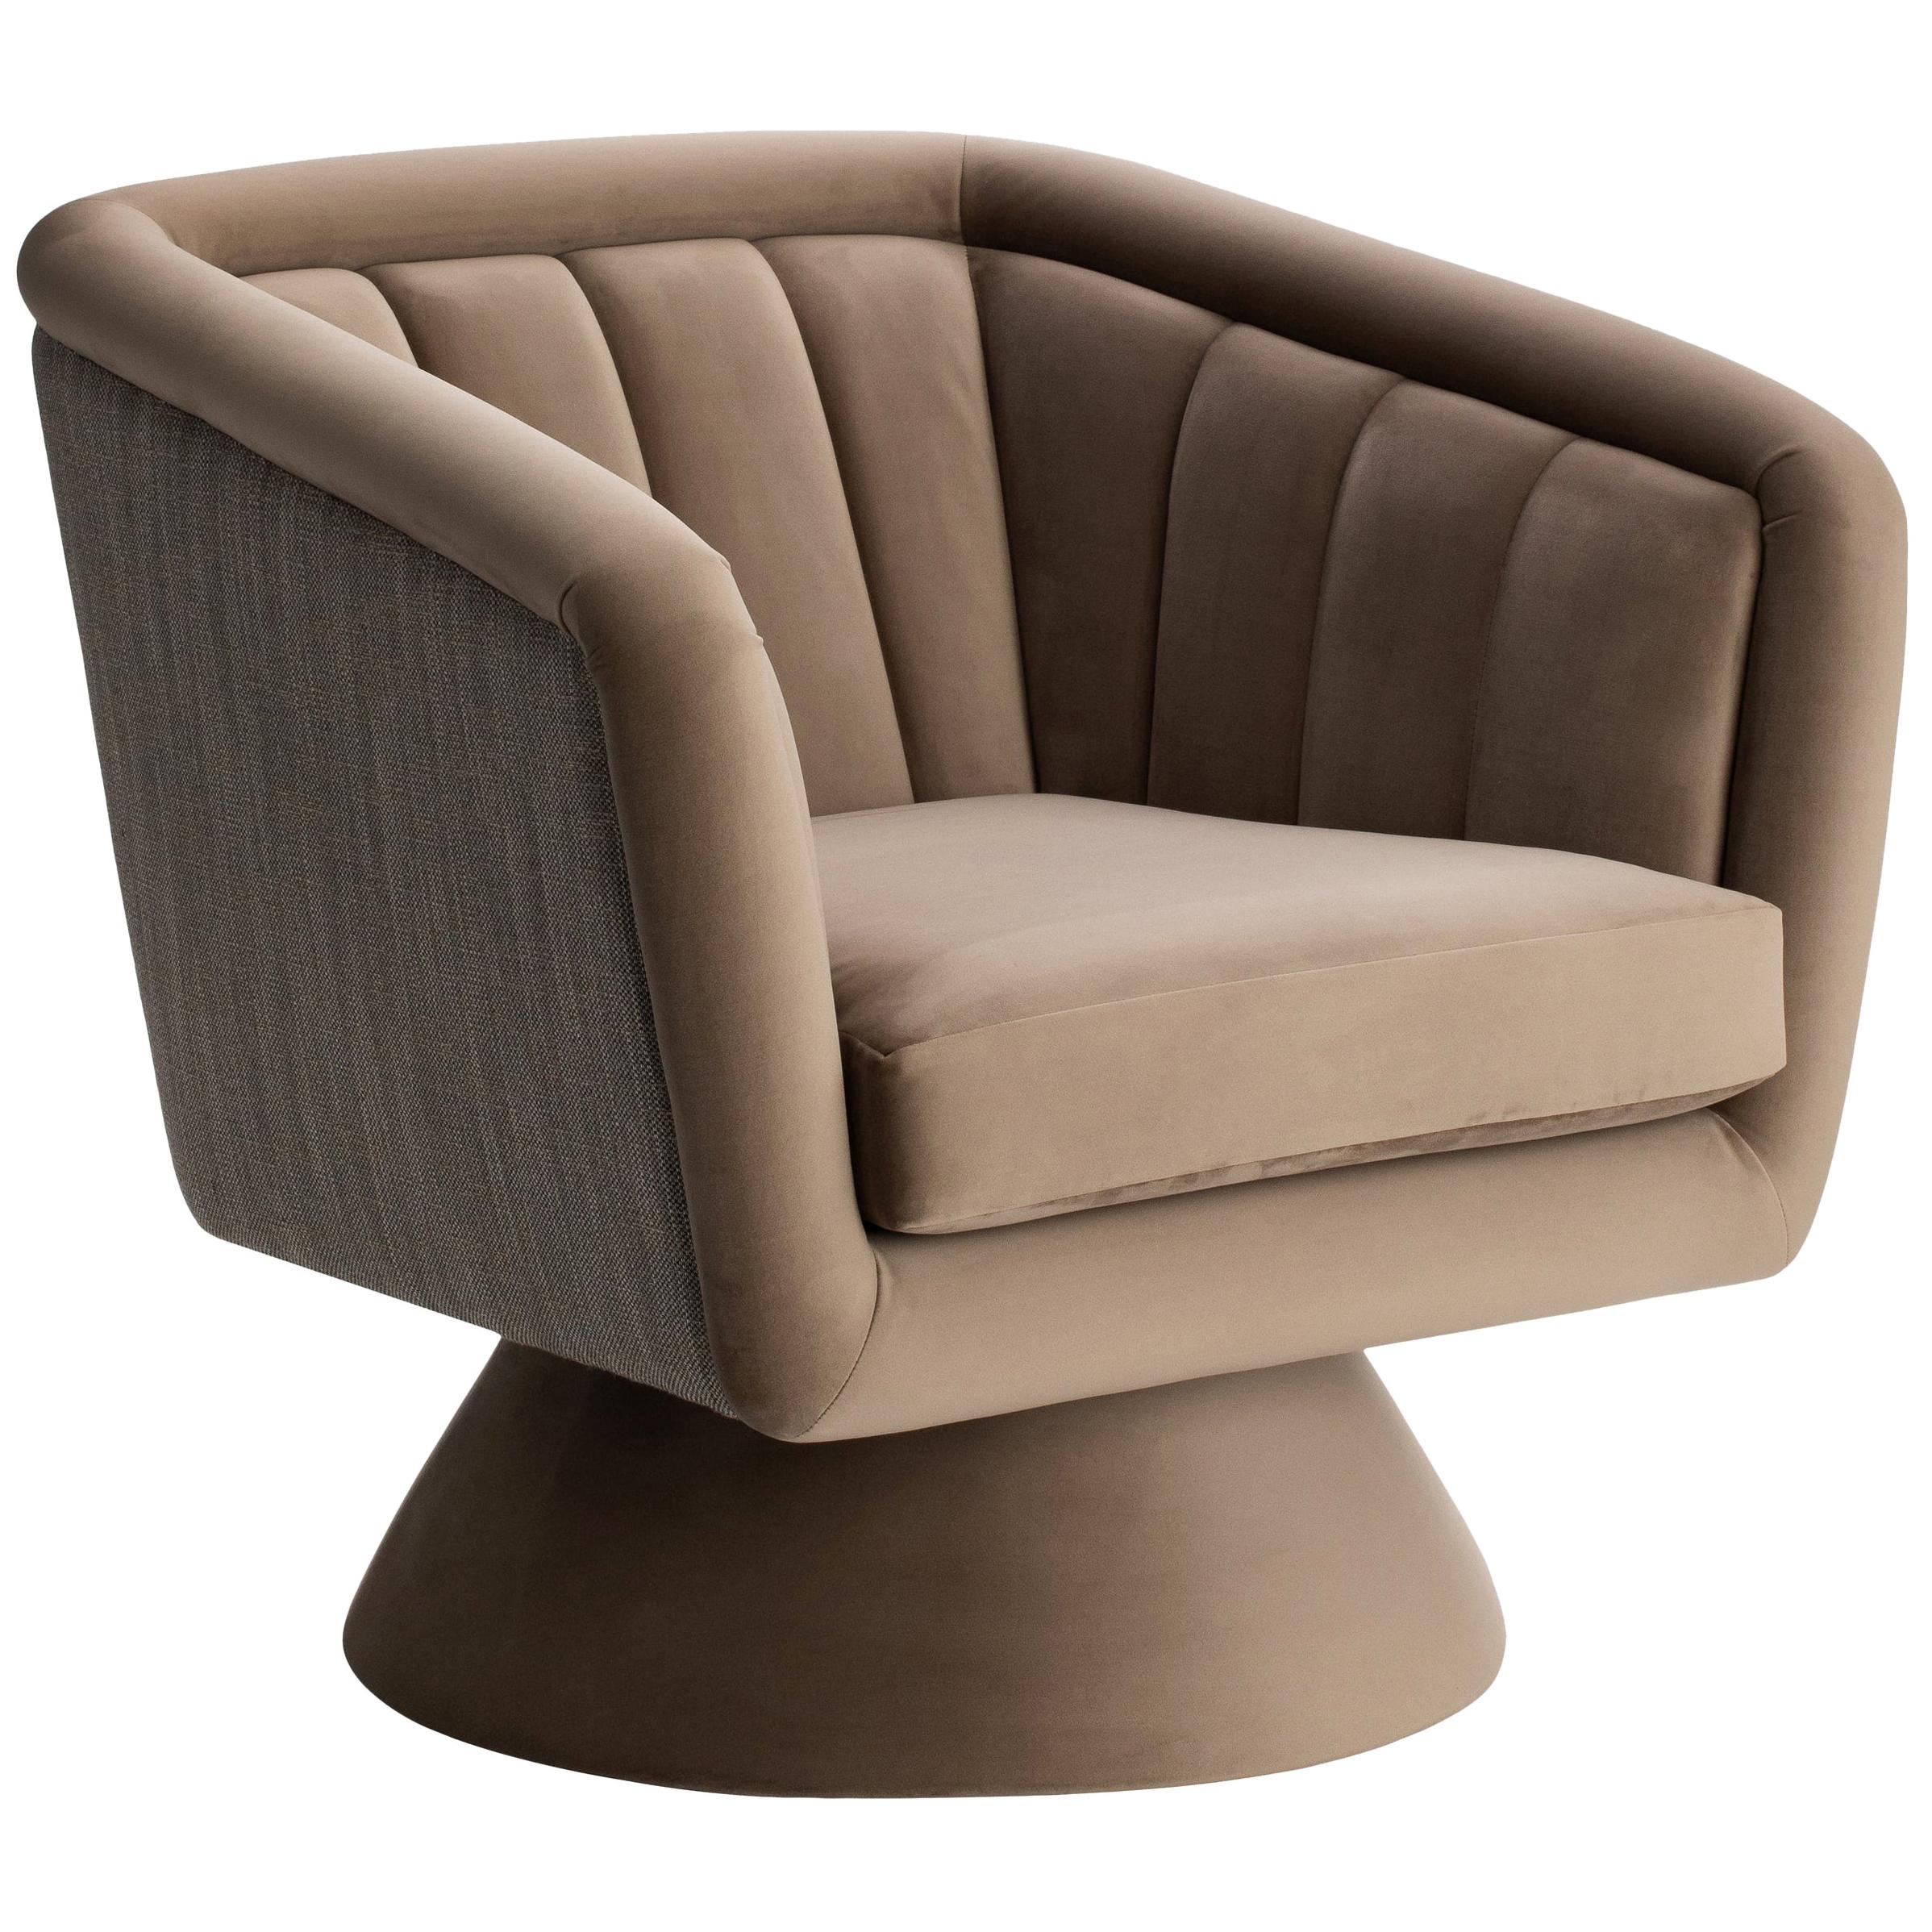 Beige Caprice Swivel Armchair Upholstered with Two Fabrics